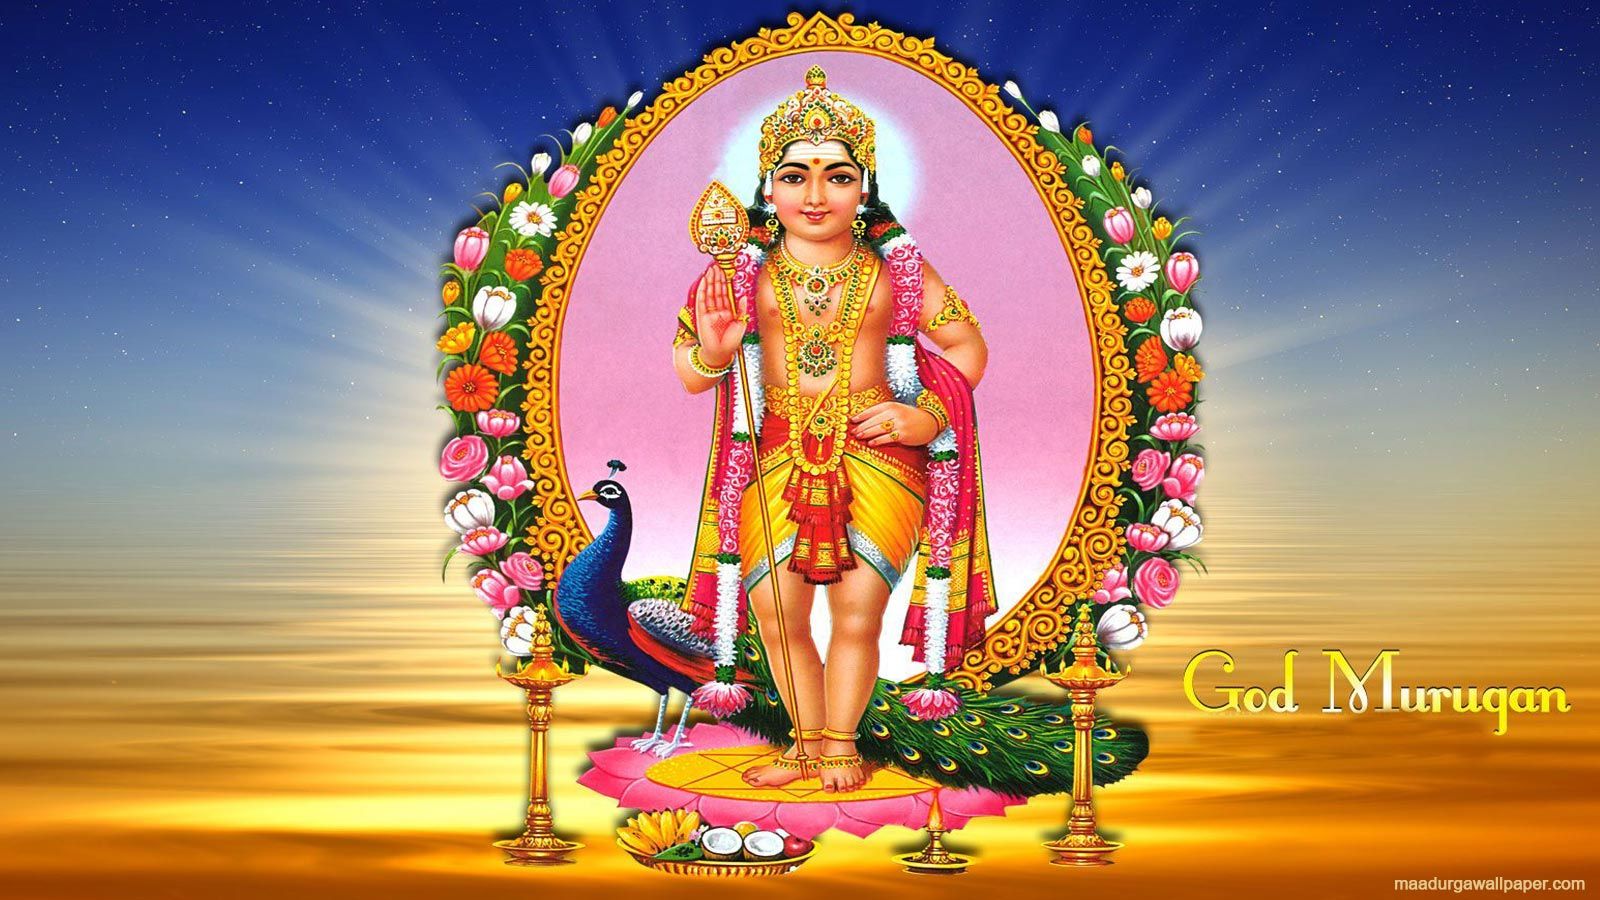 Collection of Amazing Full 4K Quality God Murugan Images- Over 999+!